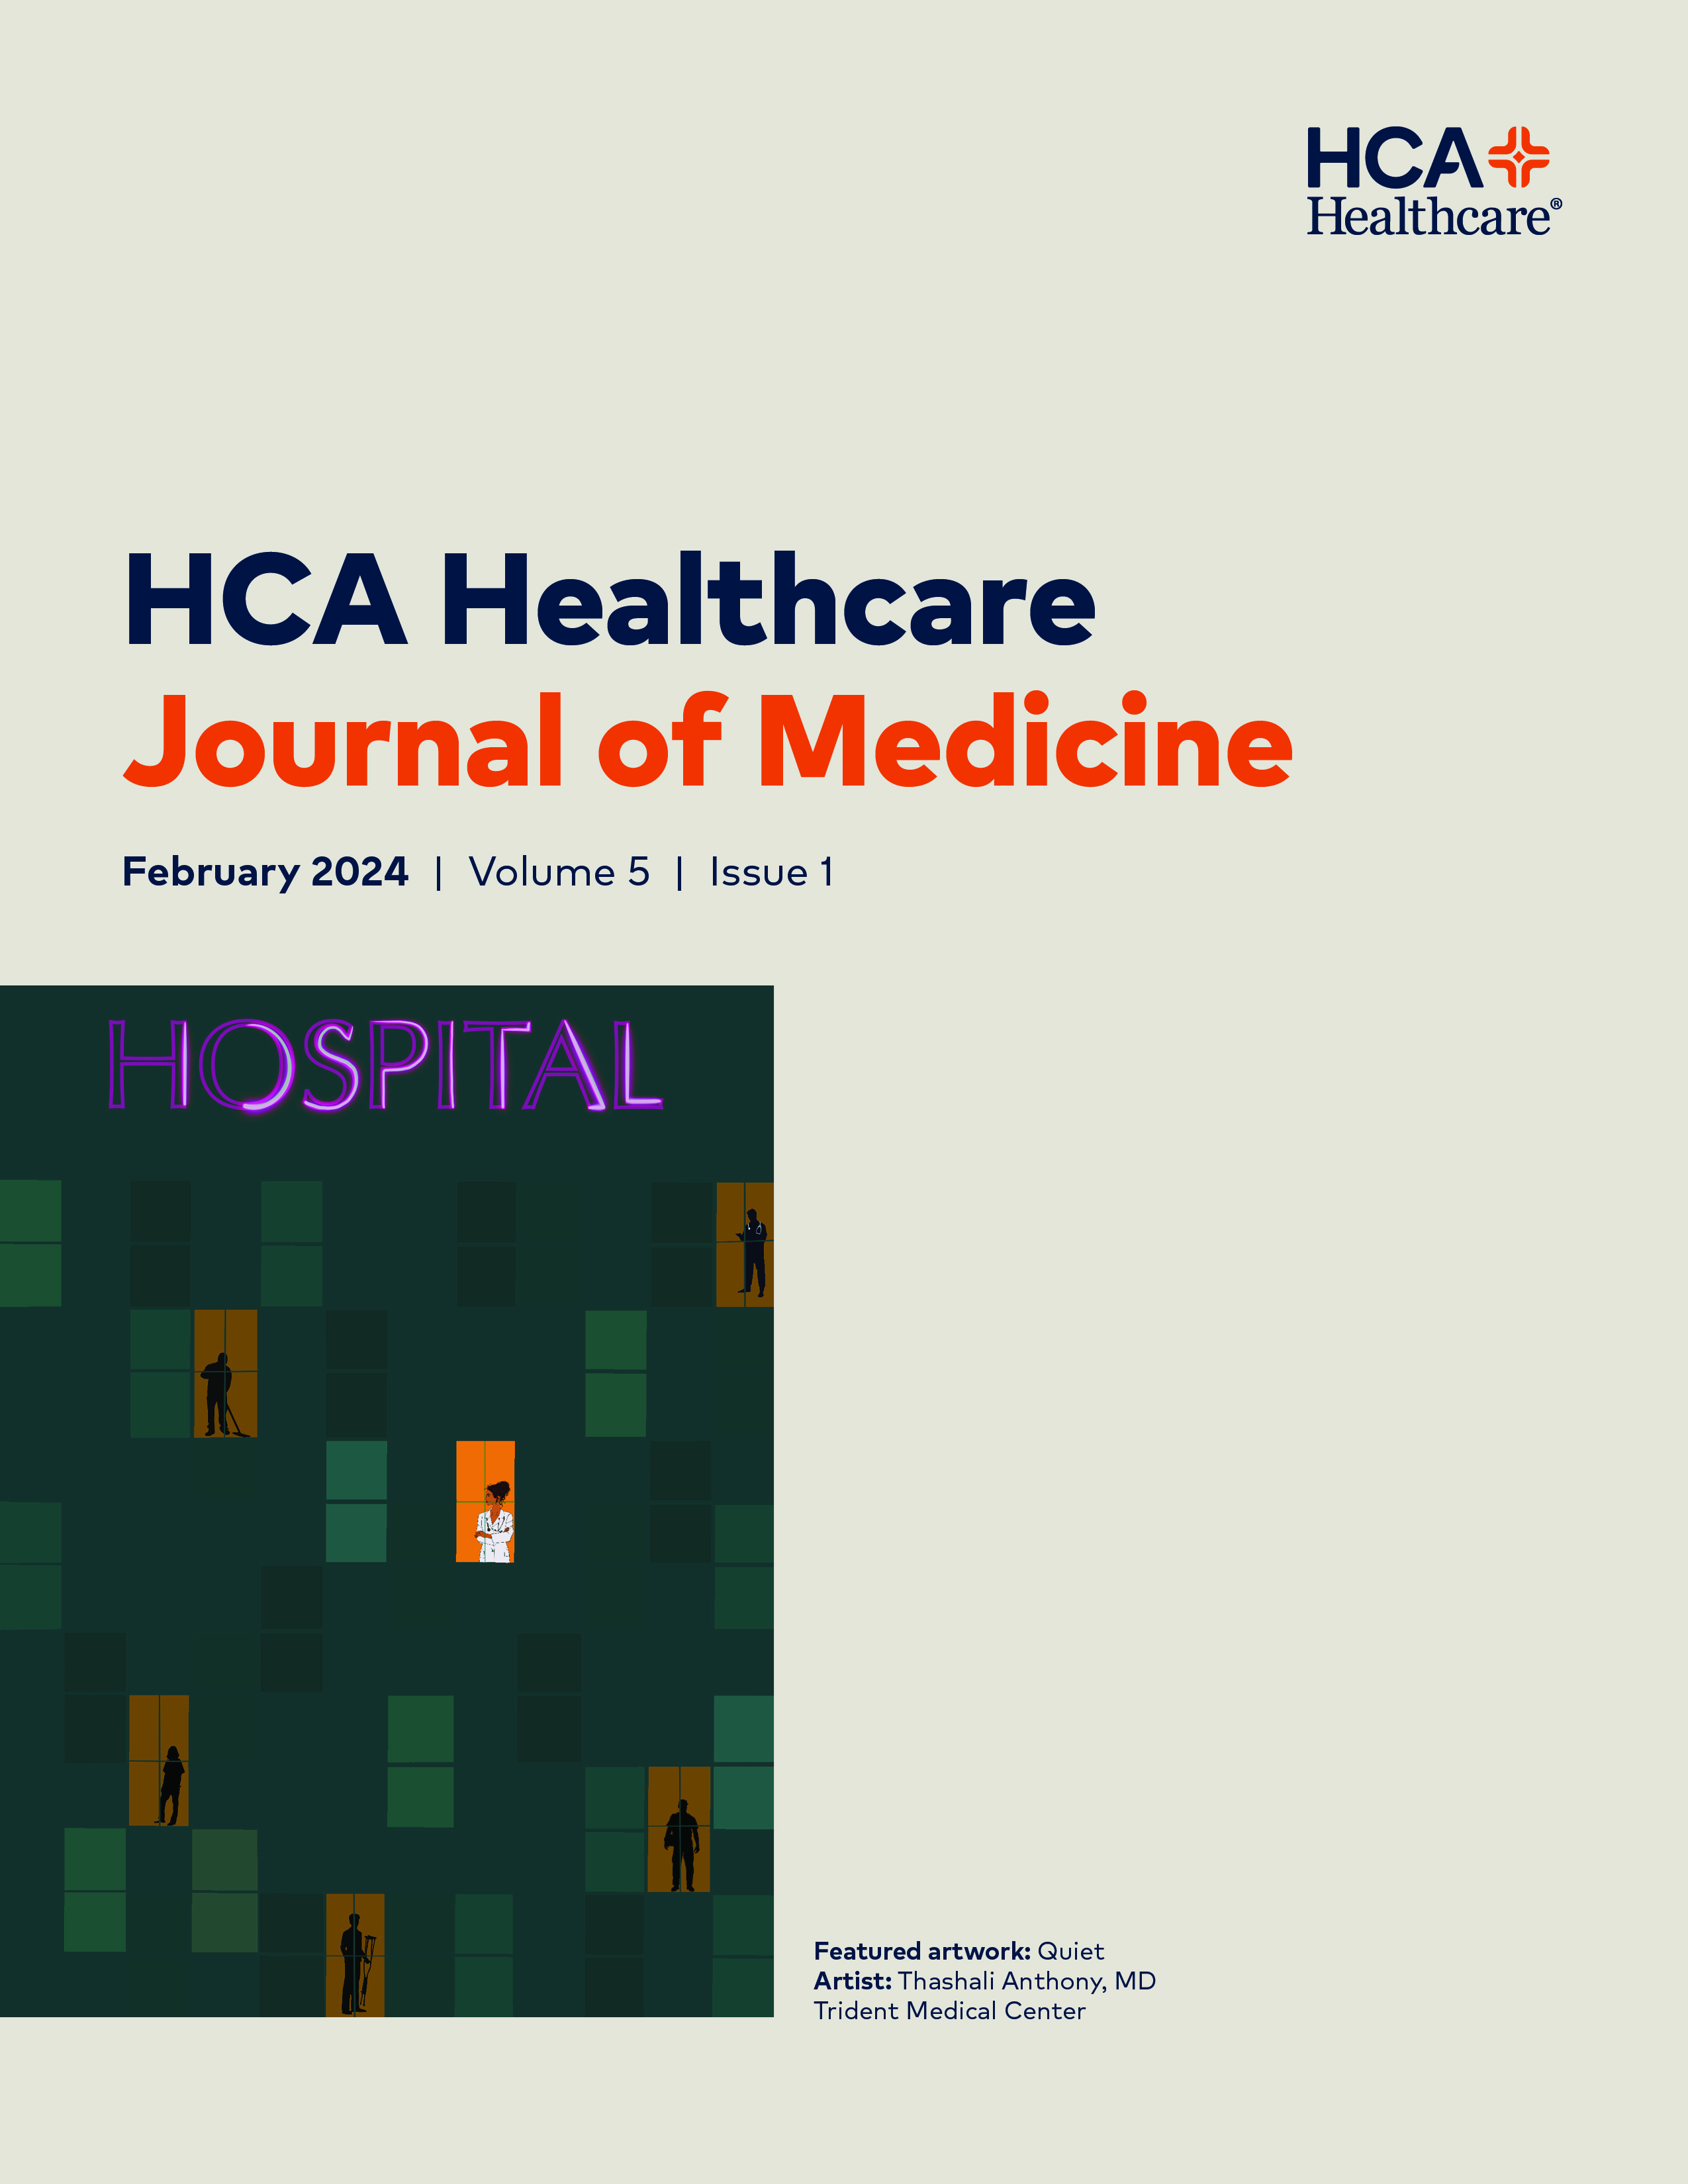 HCA Healthcare Journal of Medicine, Vol 5, Iss 1 Cover